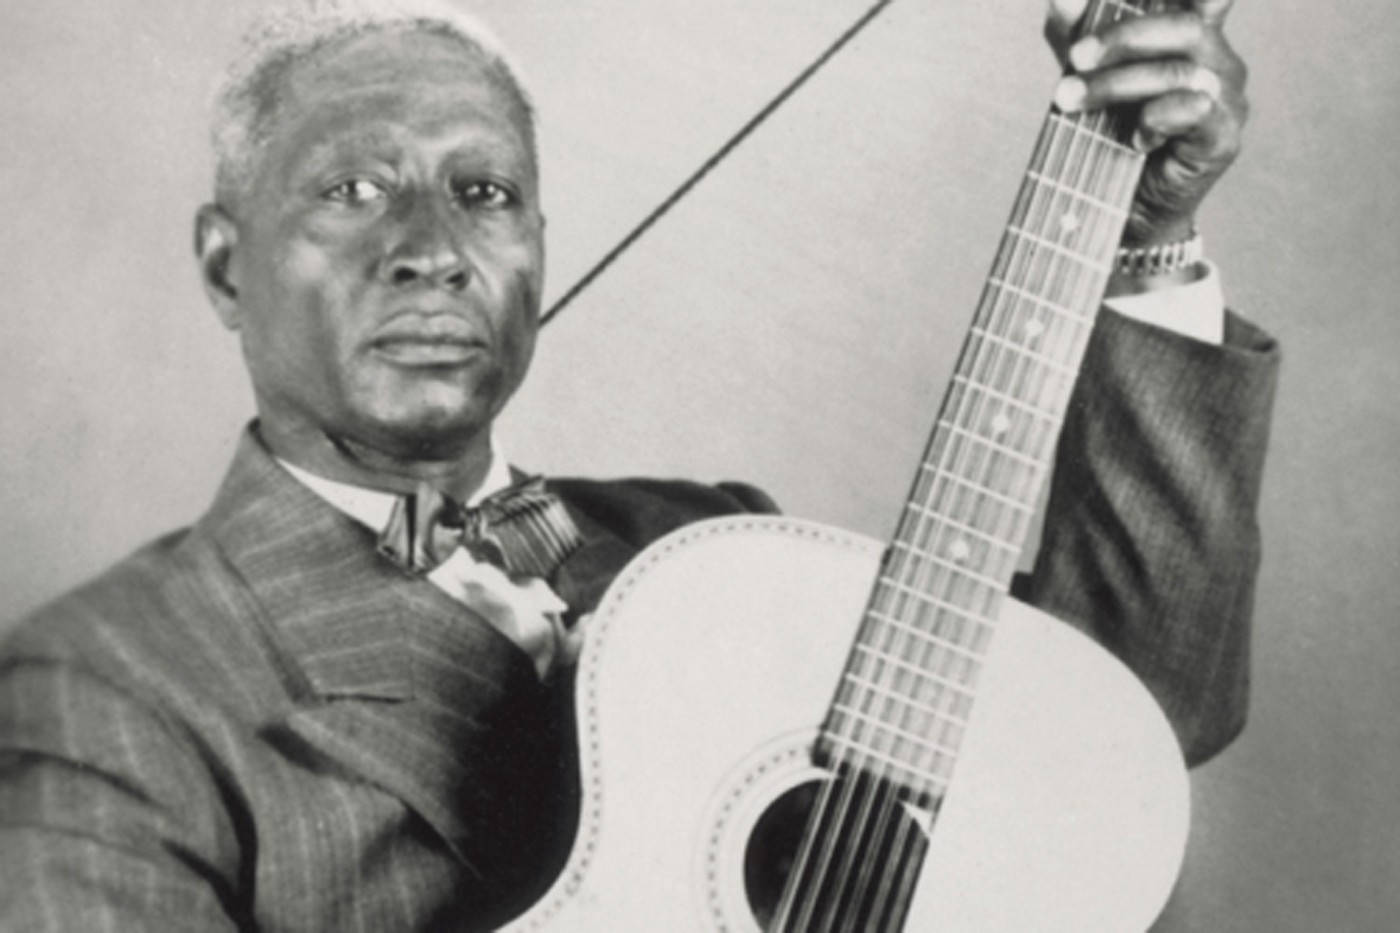 American Blues Singer Leadbelly 1920s Photograph Wallpaper